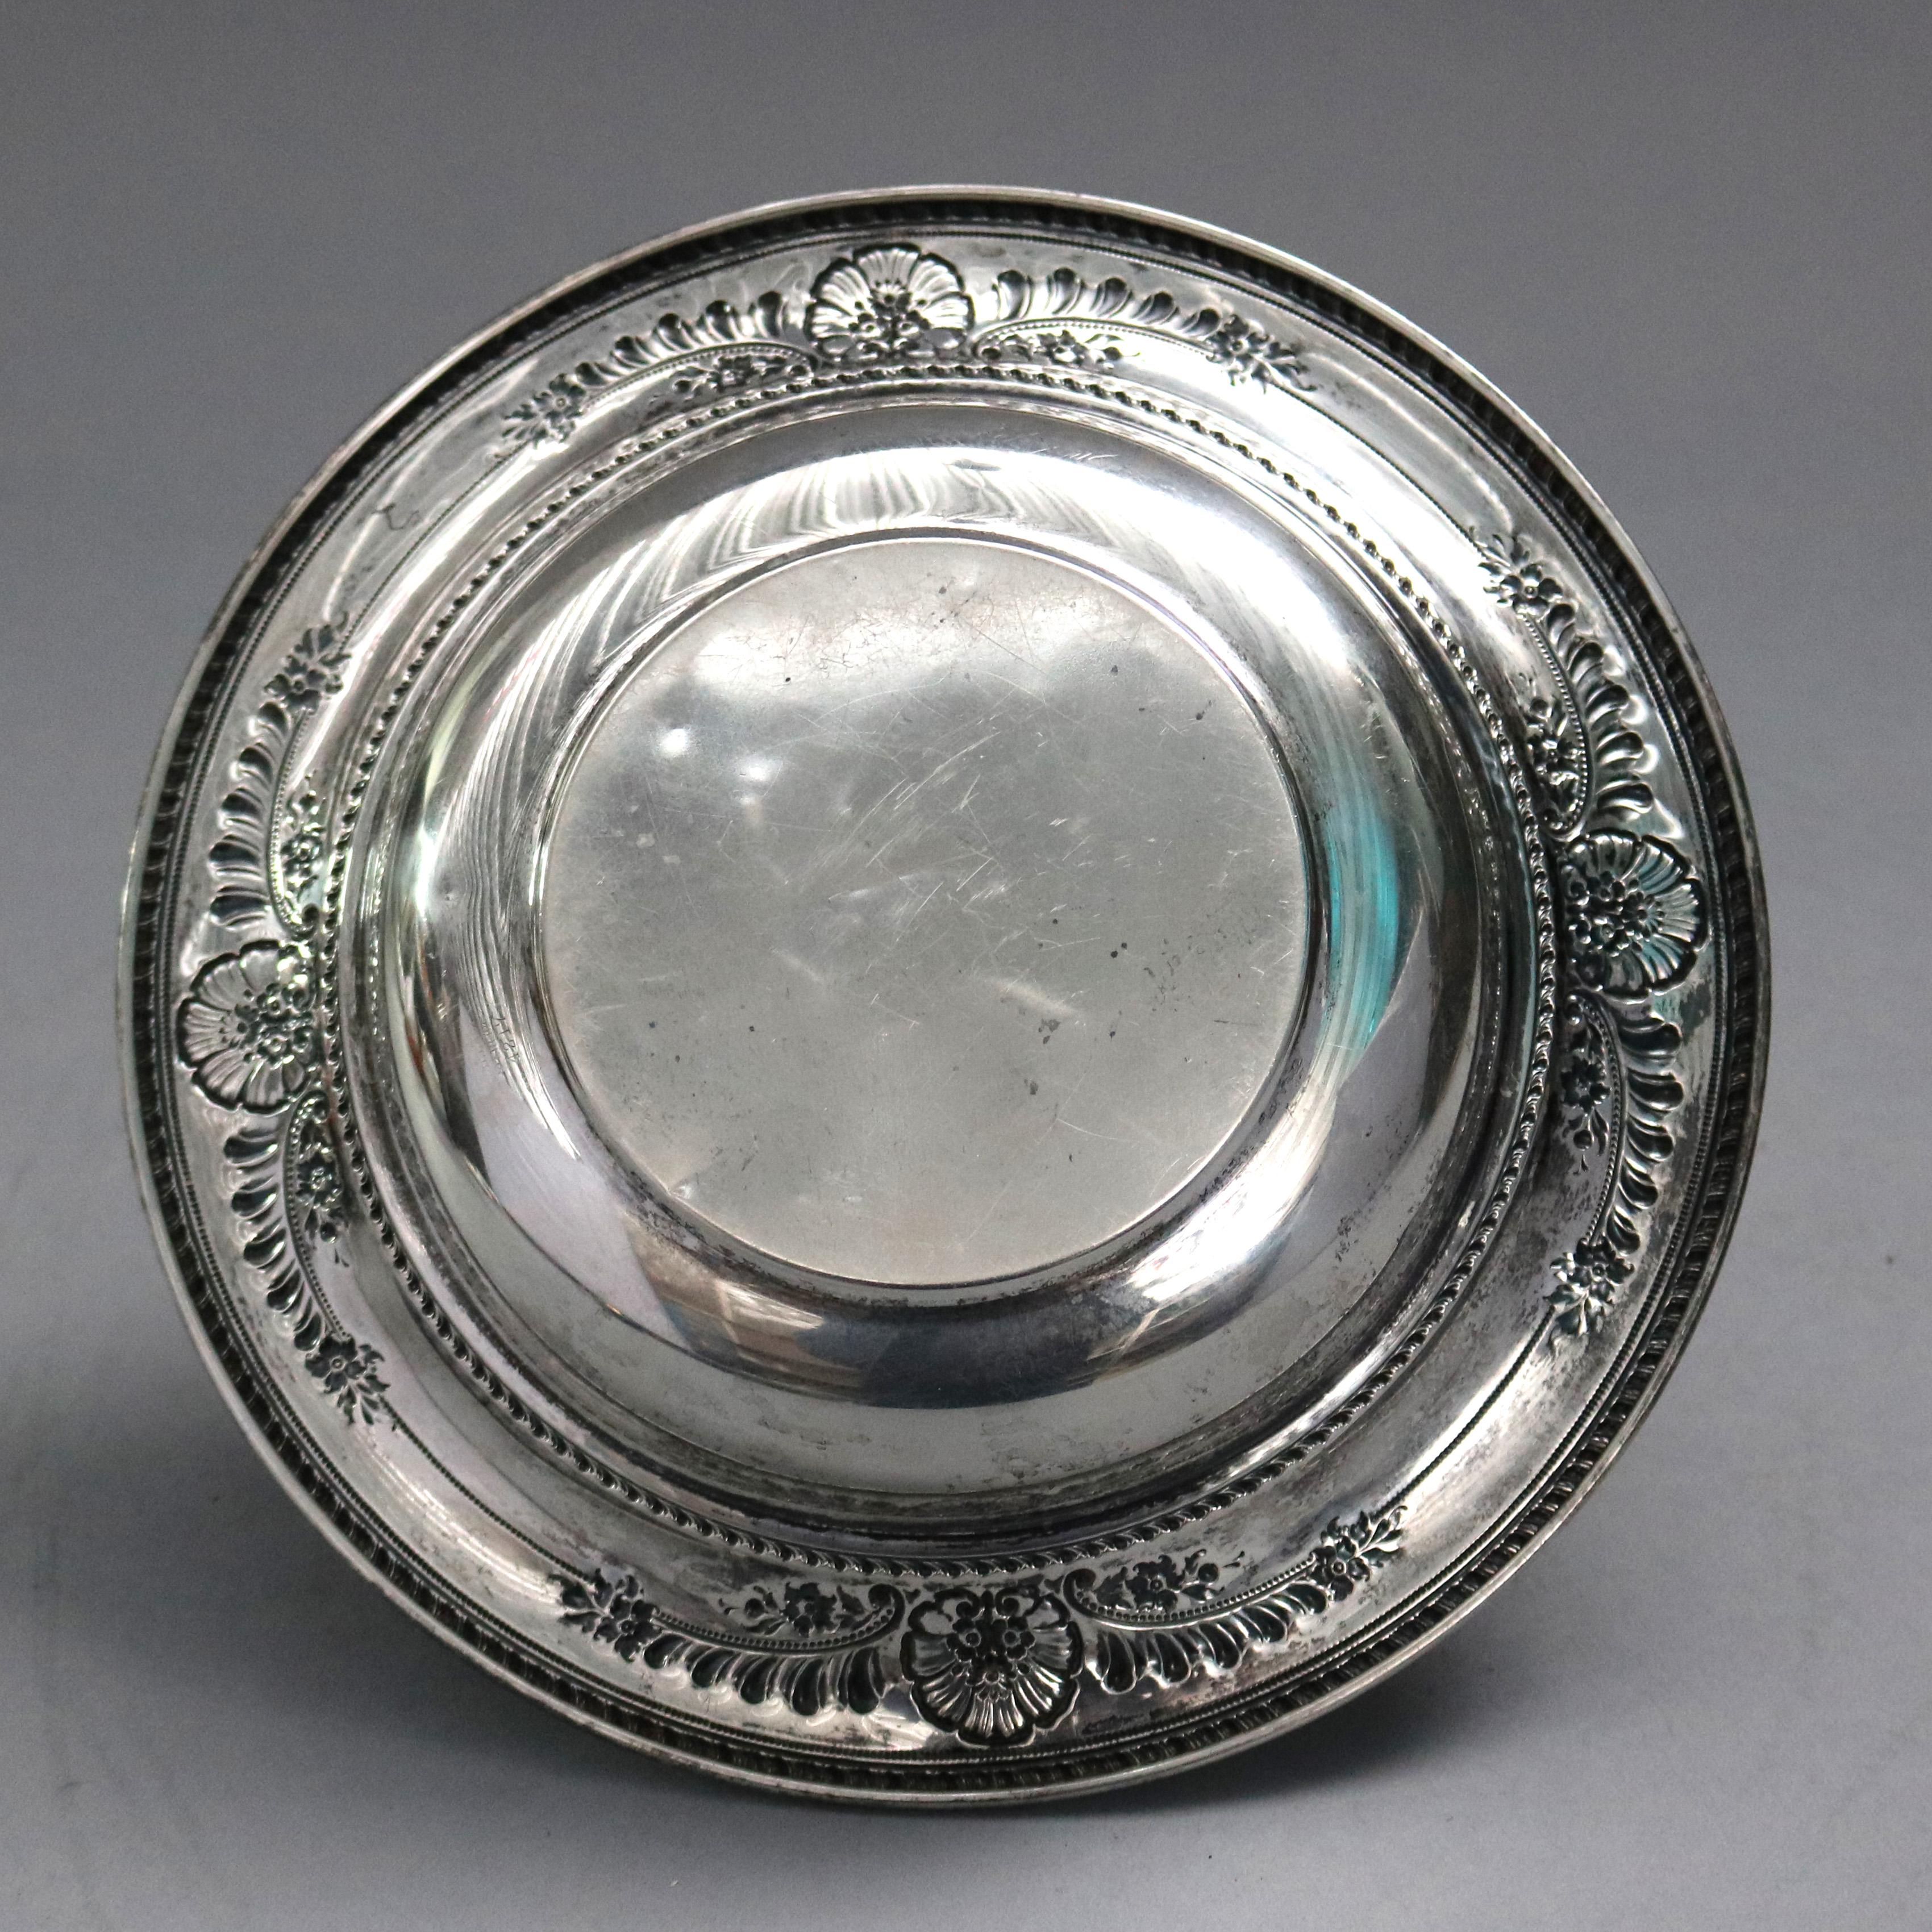 American Vintage Wallace Sterling Silver Repousse Serving Bowl, circa 1930